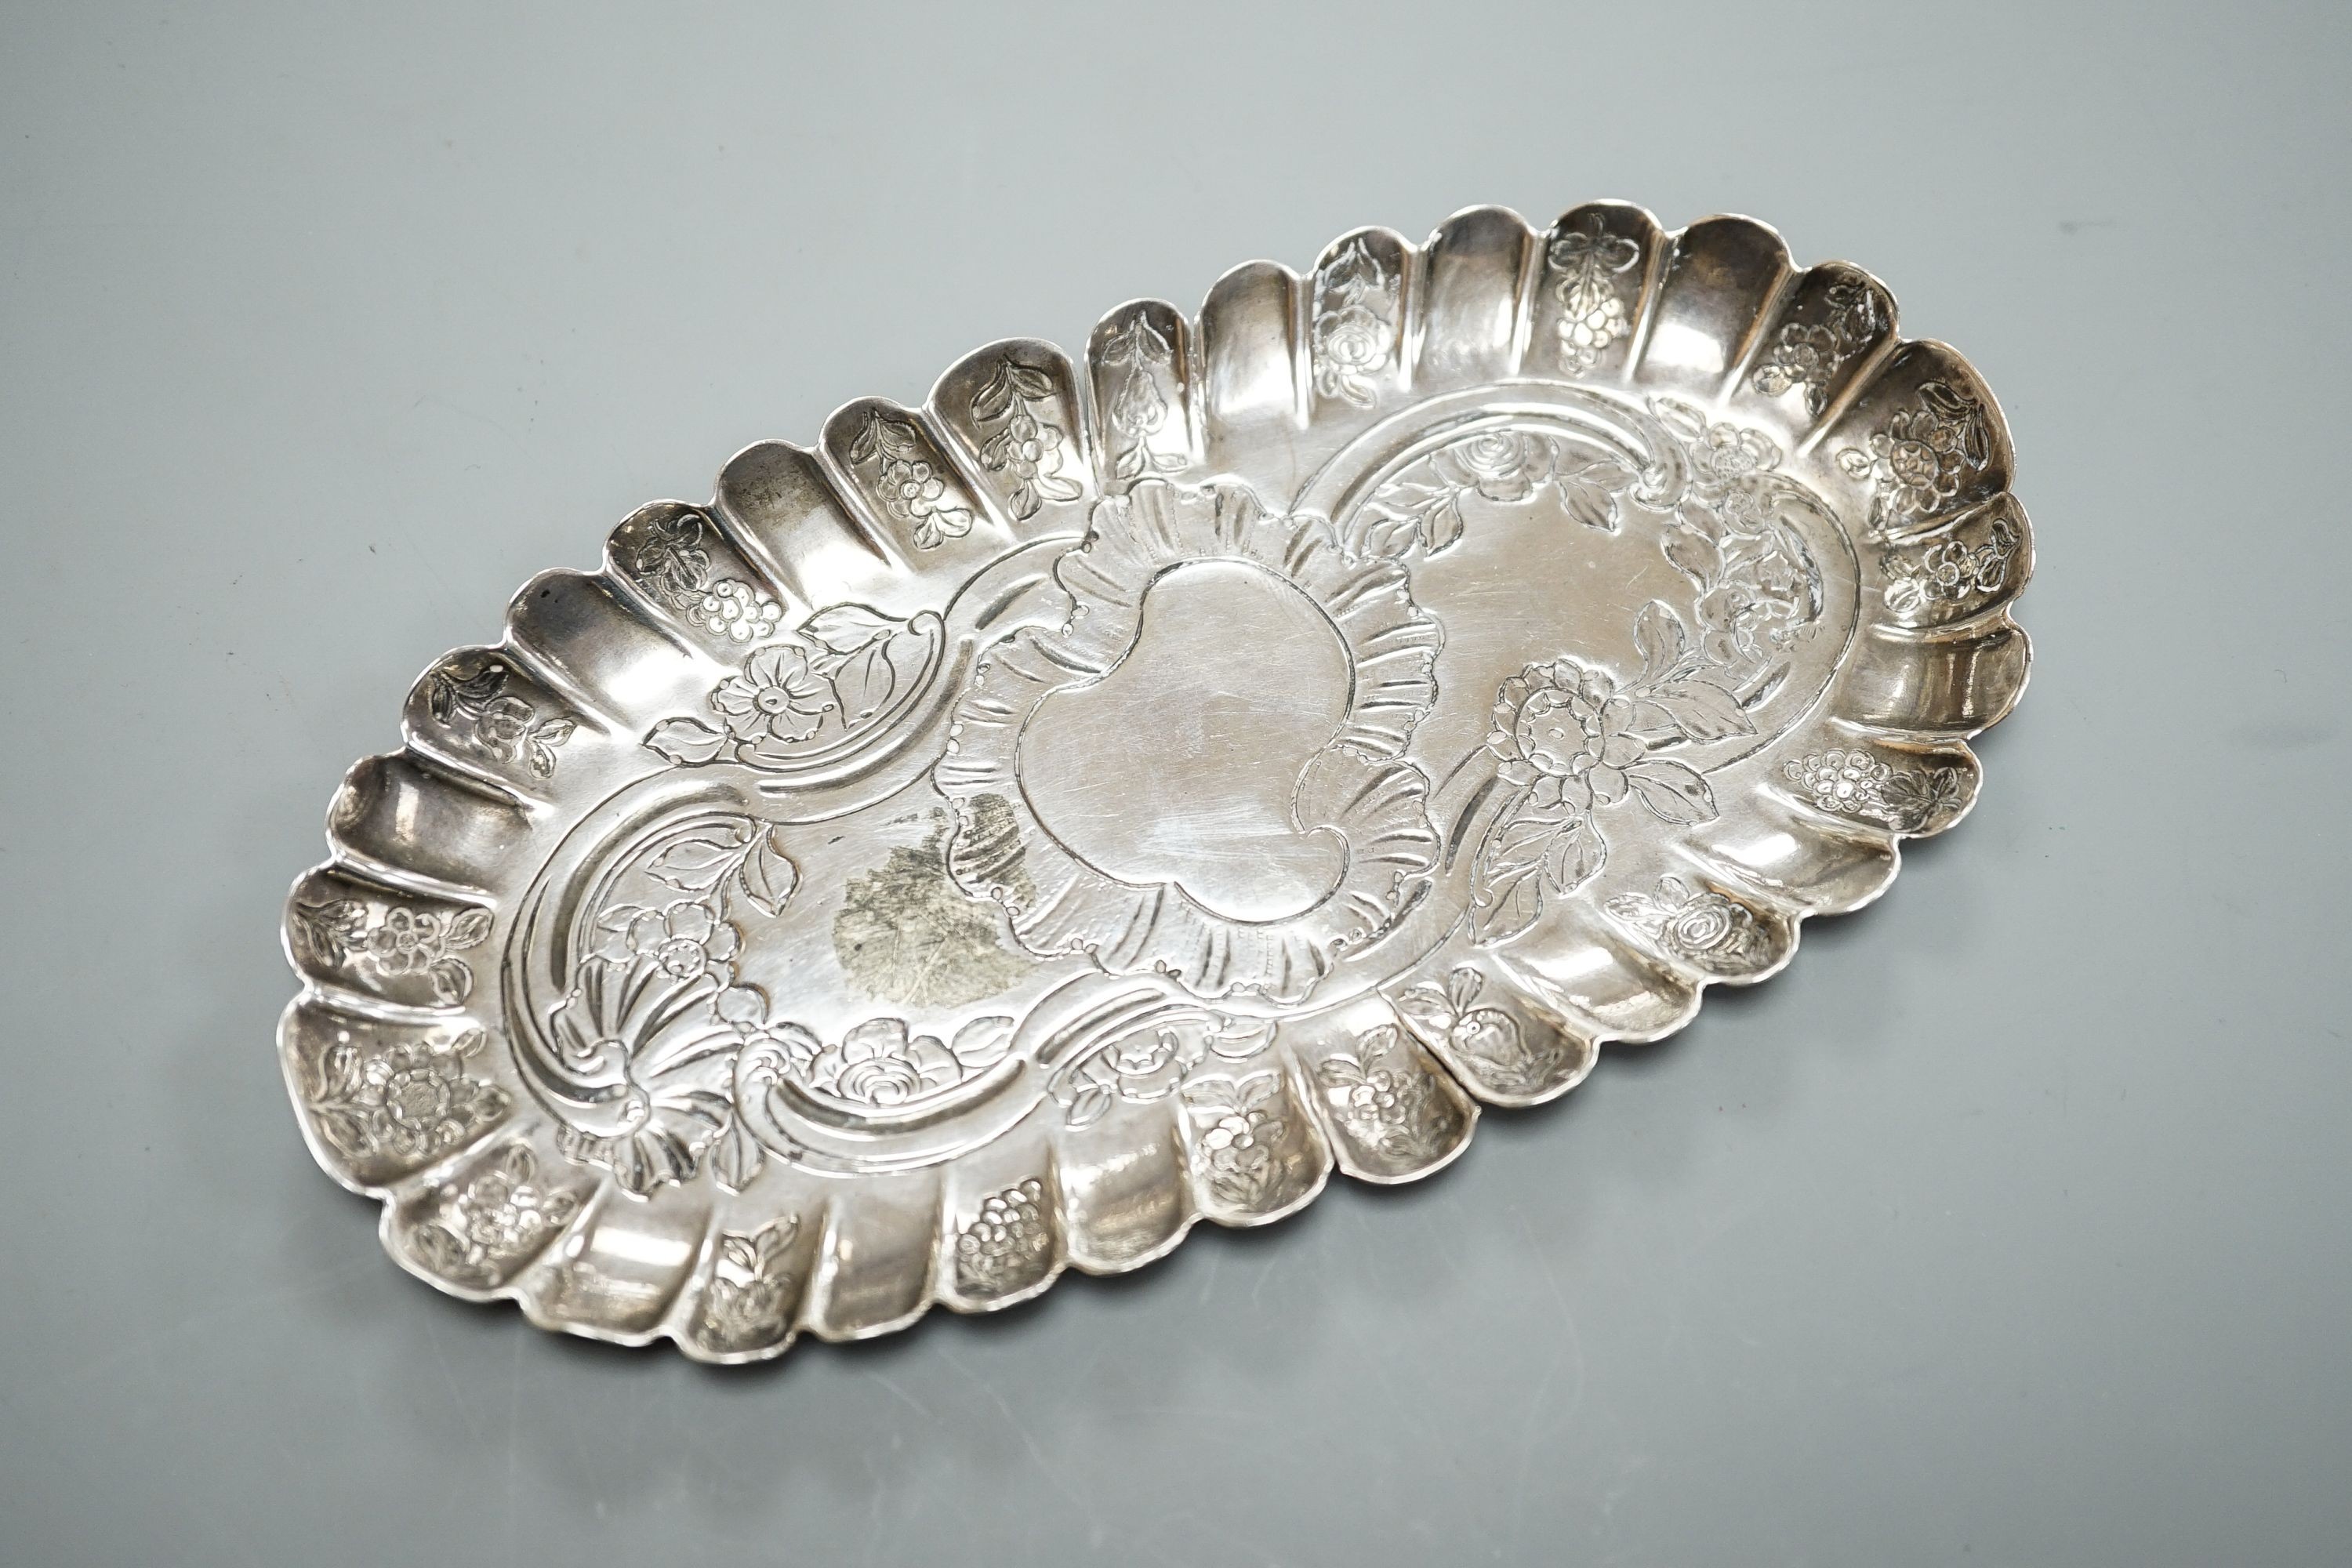 A mid 18th century Irish embossed silver oval pin tray, with engraved date and initials, maker ID?, Dublin, circa 1750, 16.4cm, 74 grams (a.f.)